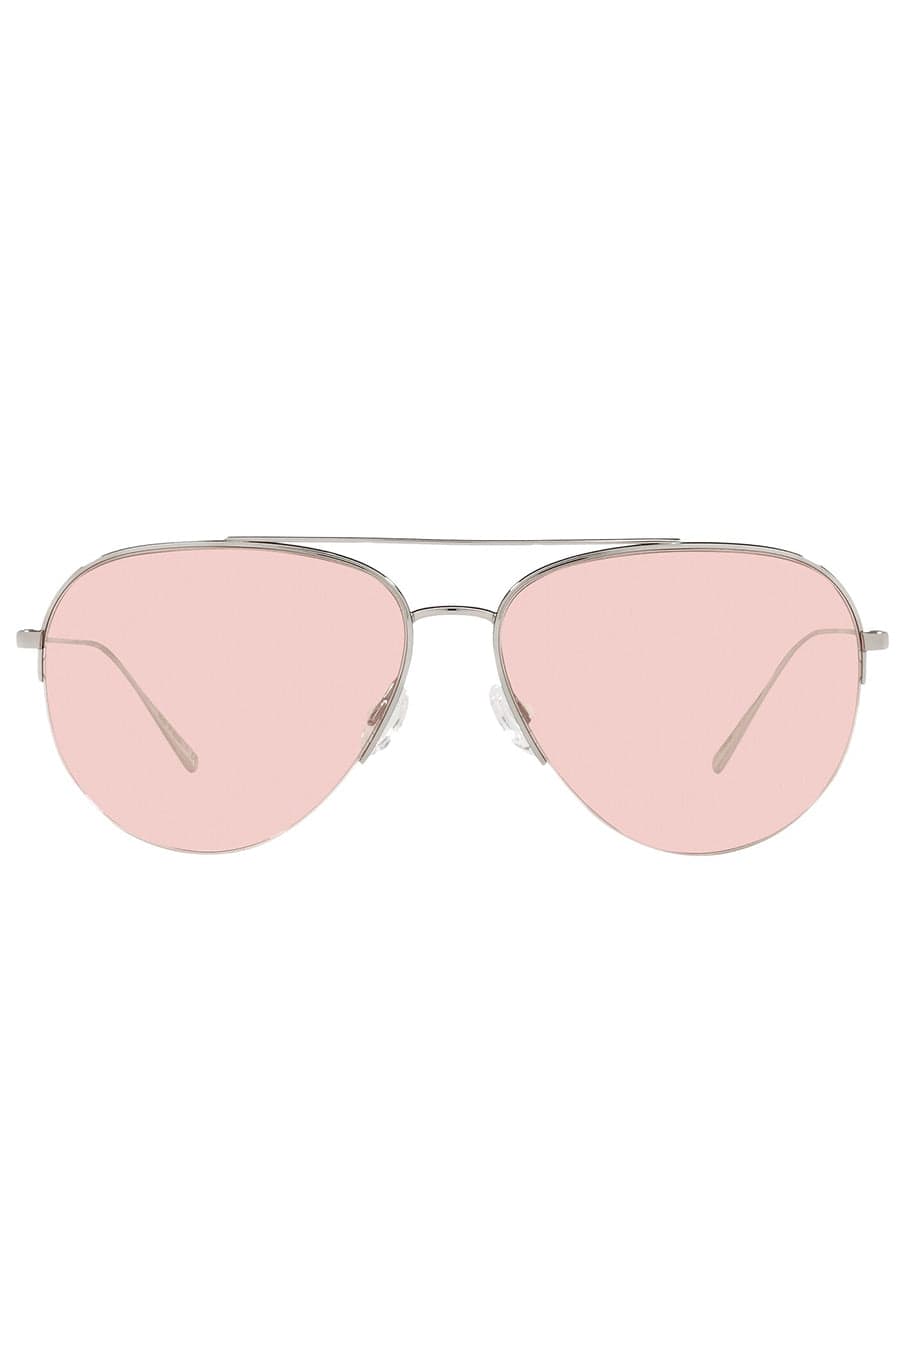 OLIVER PEOPLES-Cleamons Sunglasses - Silver Poppy-SILVER/POPPY